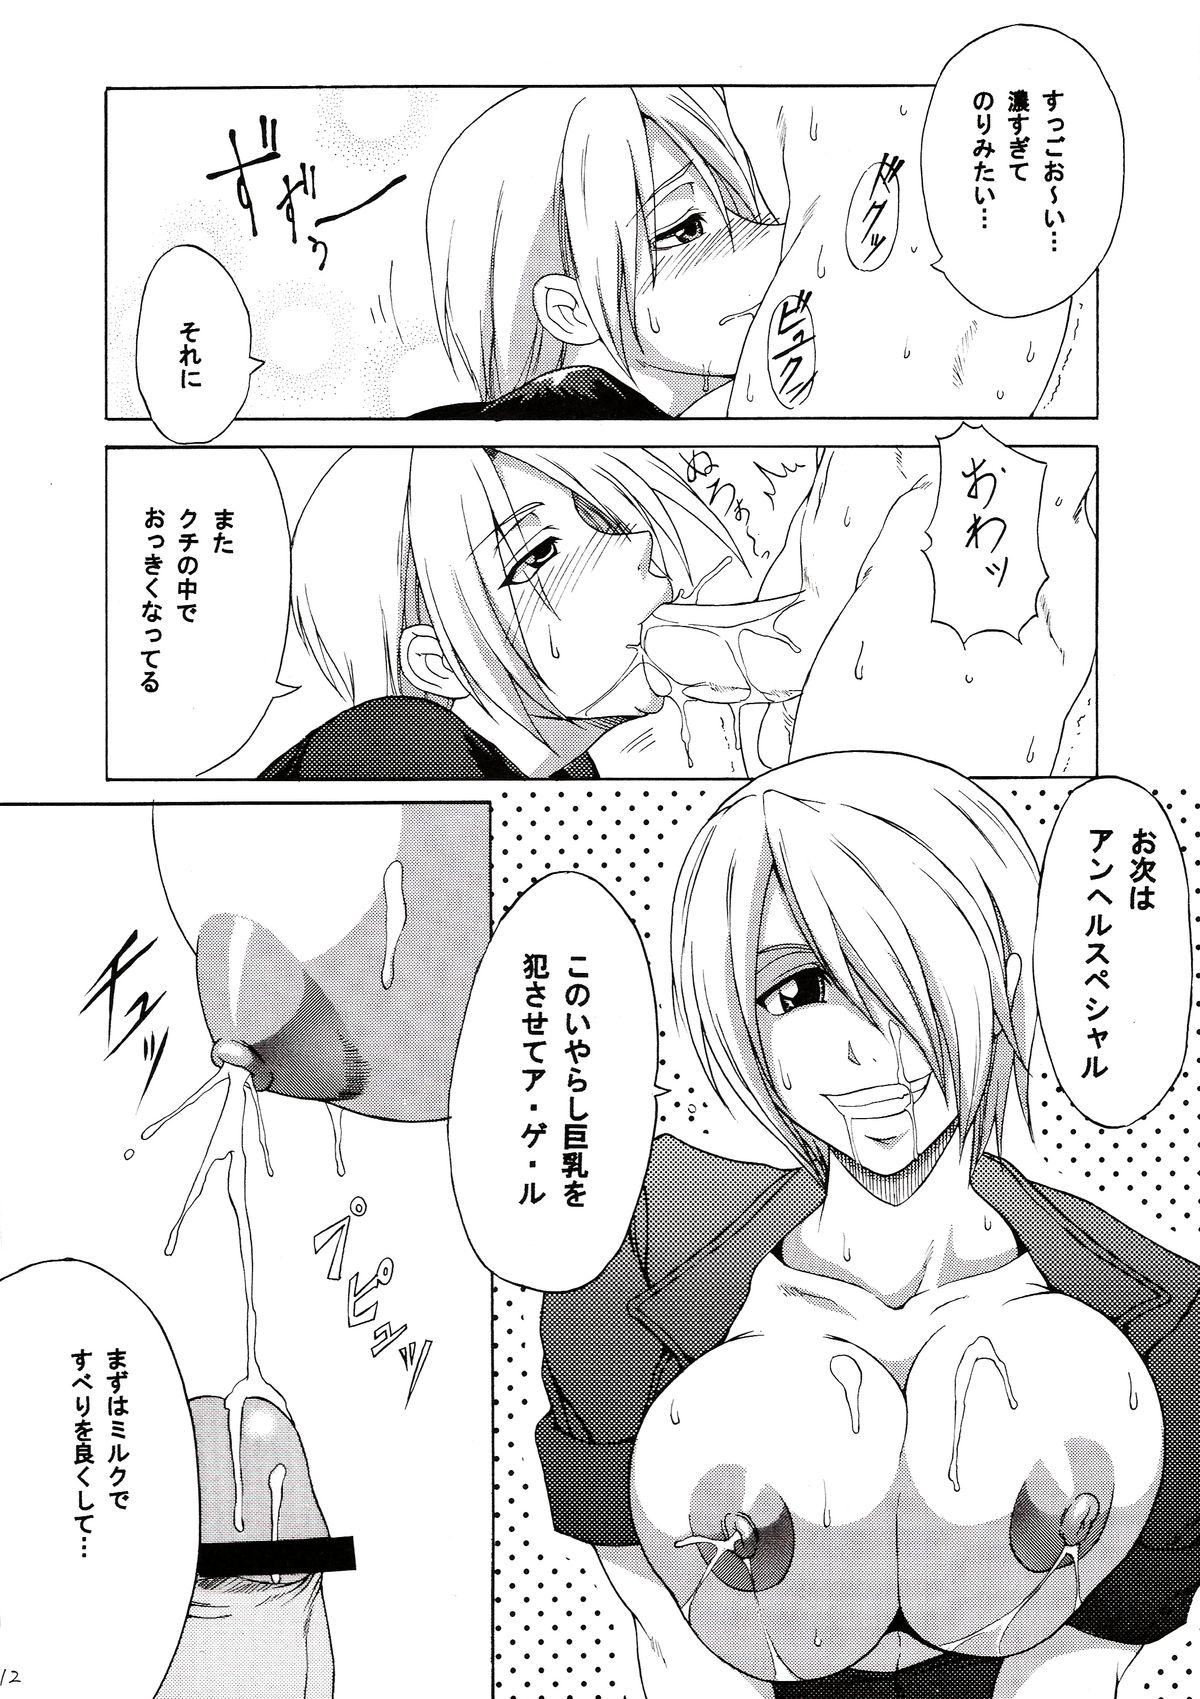 Funny HAIJO NINPOUCHOU 9 - King of fighters Ass Lick - Page 12